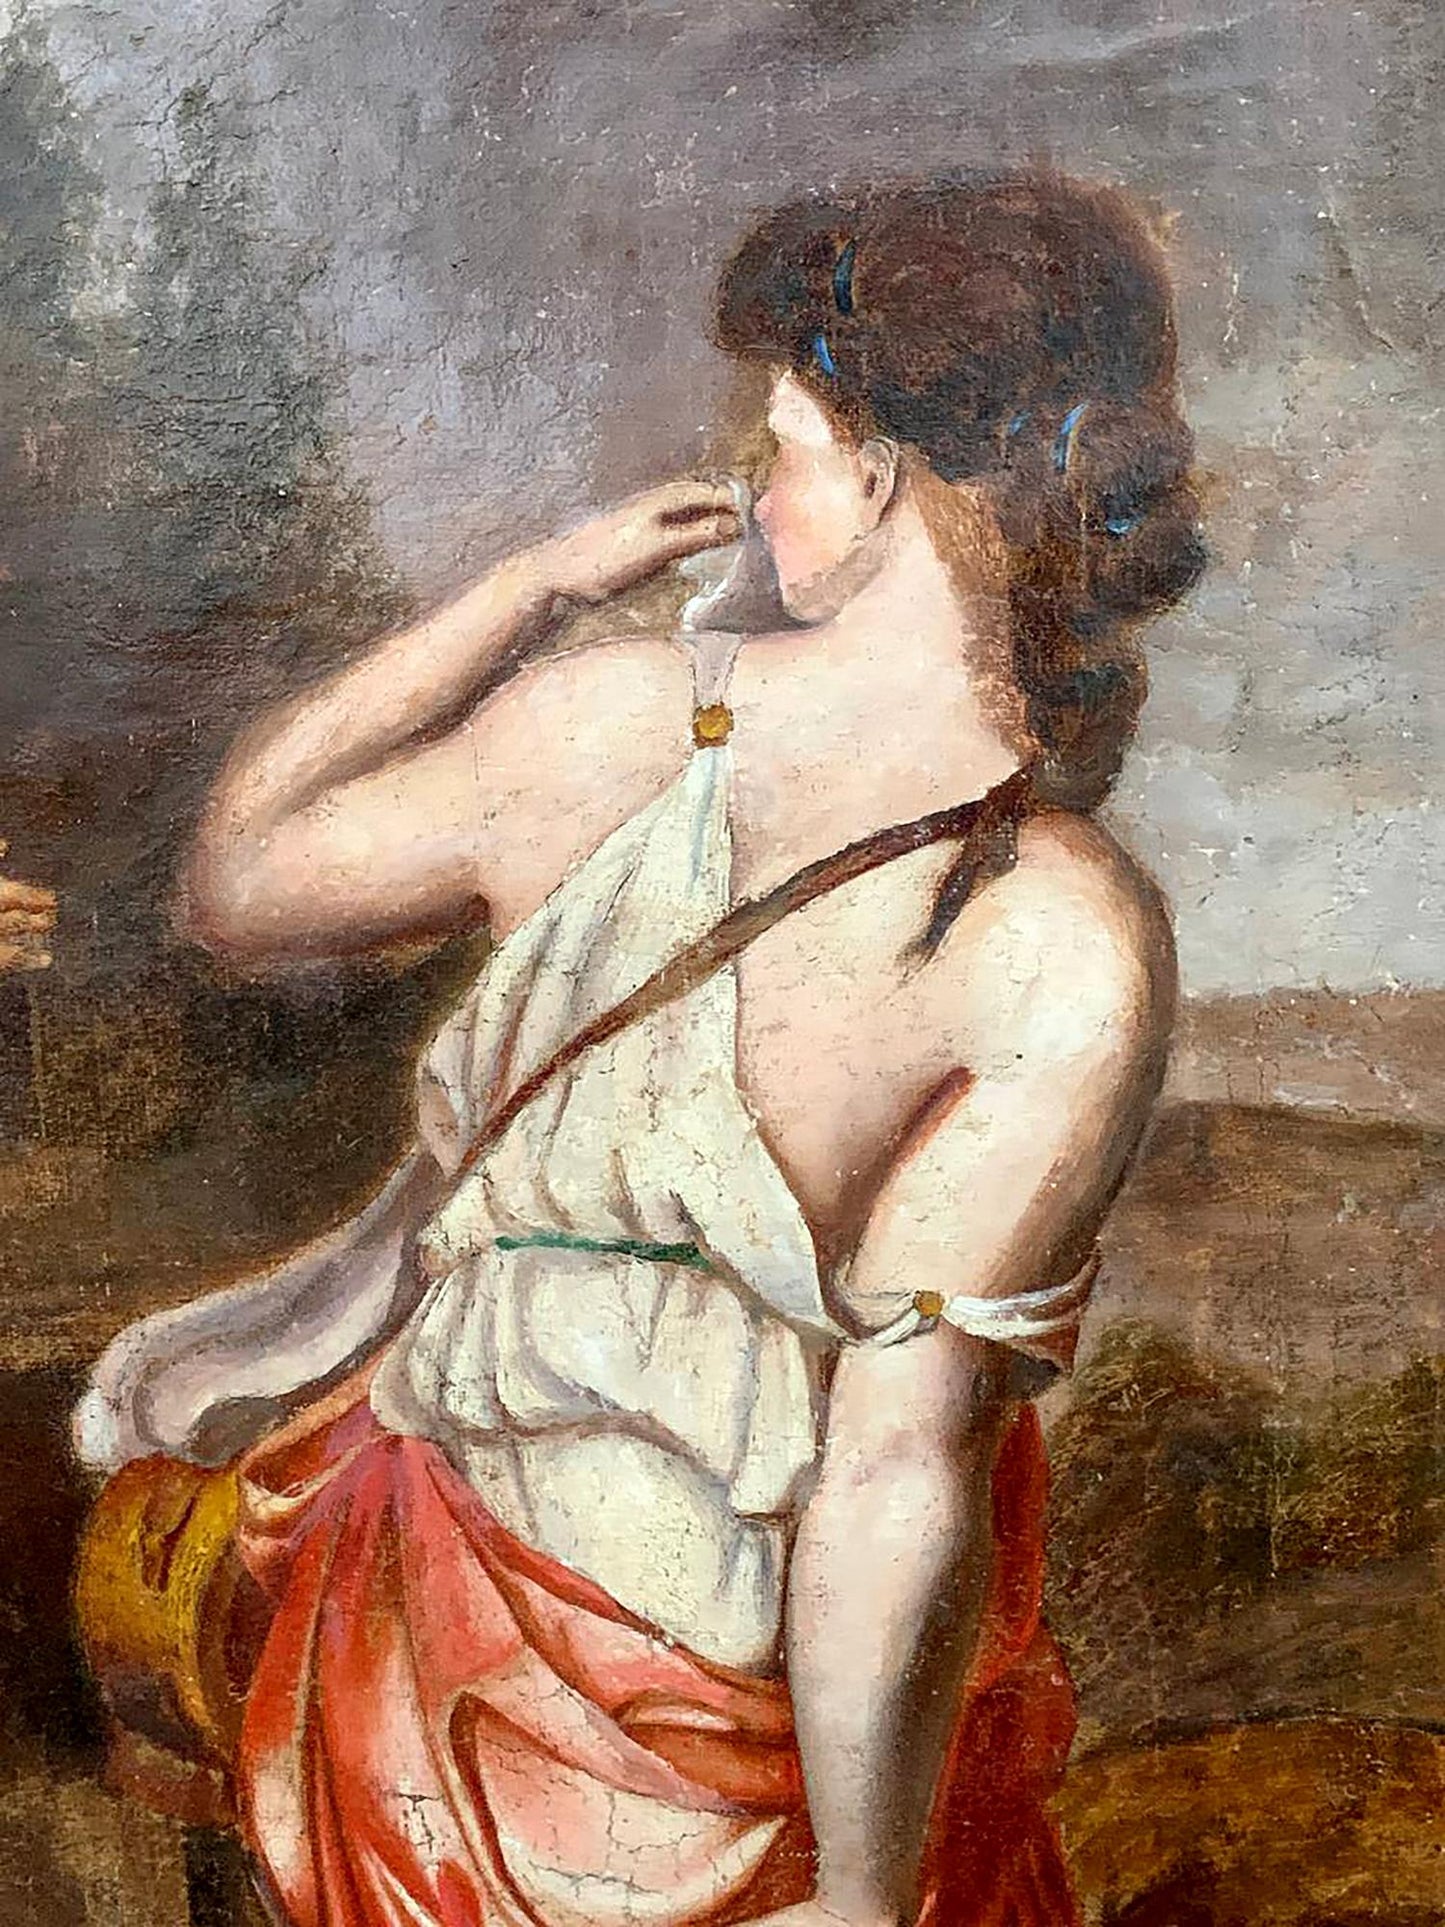 Oil painting Parting Unknown artist 18th early 19th century